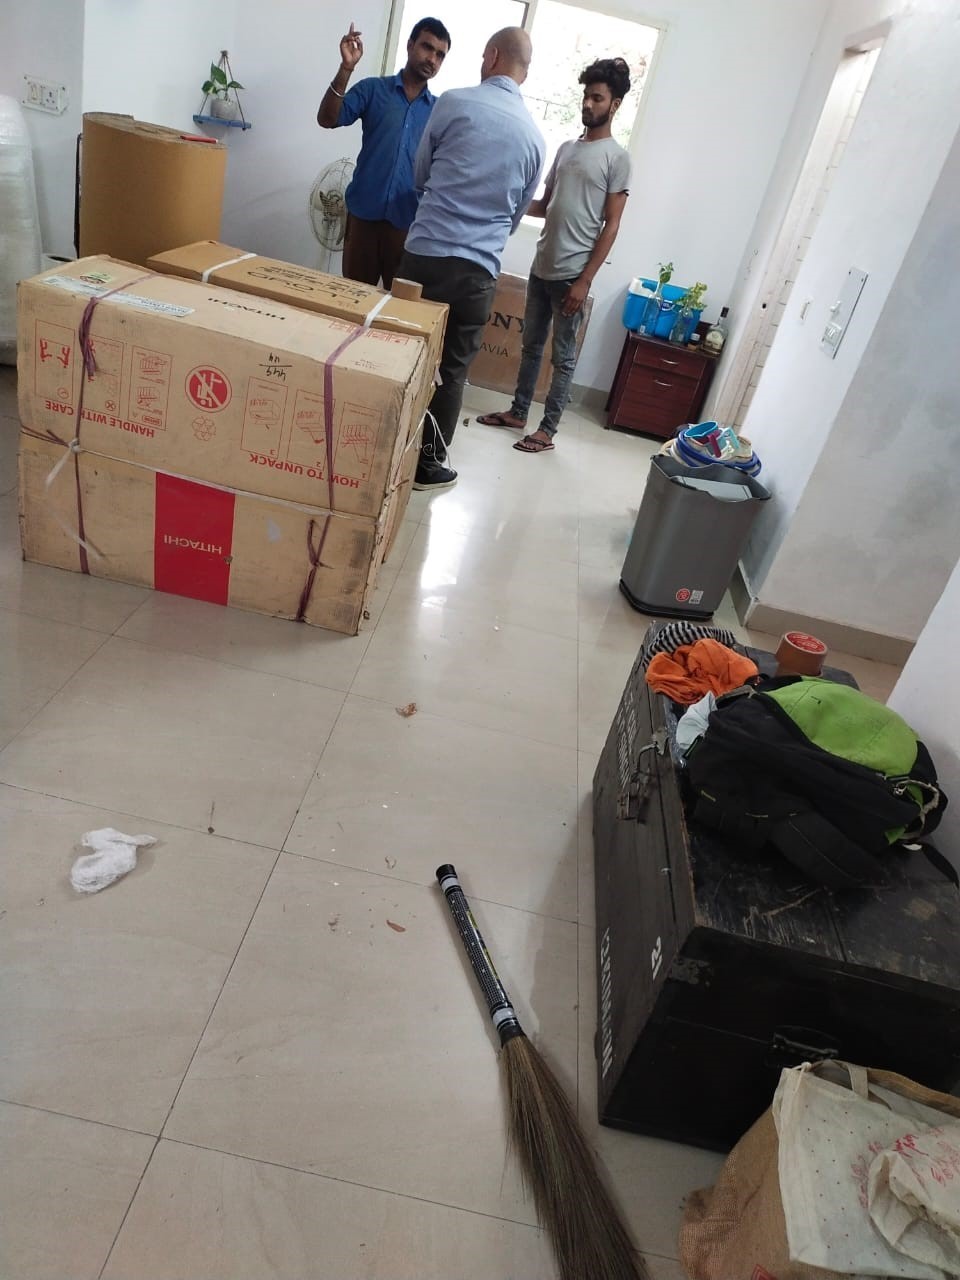 Rehousing packers and movers from Hyderabad transportation services image in Chennai office